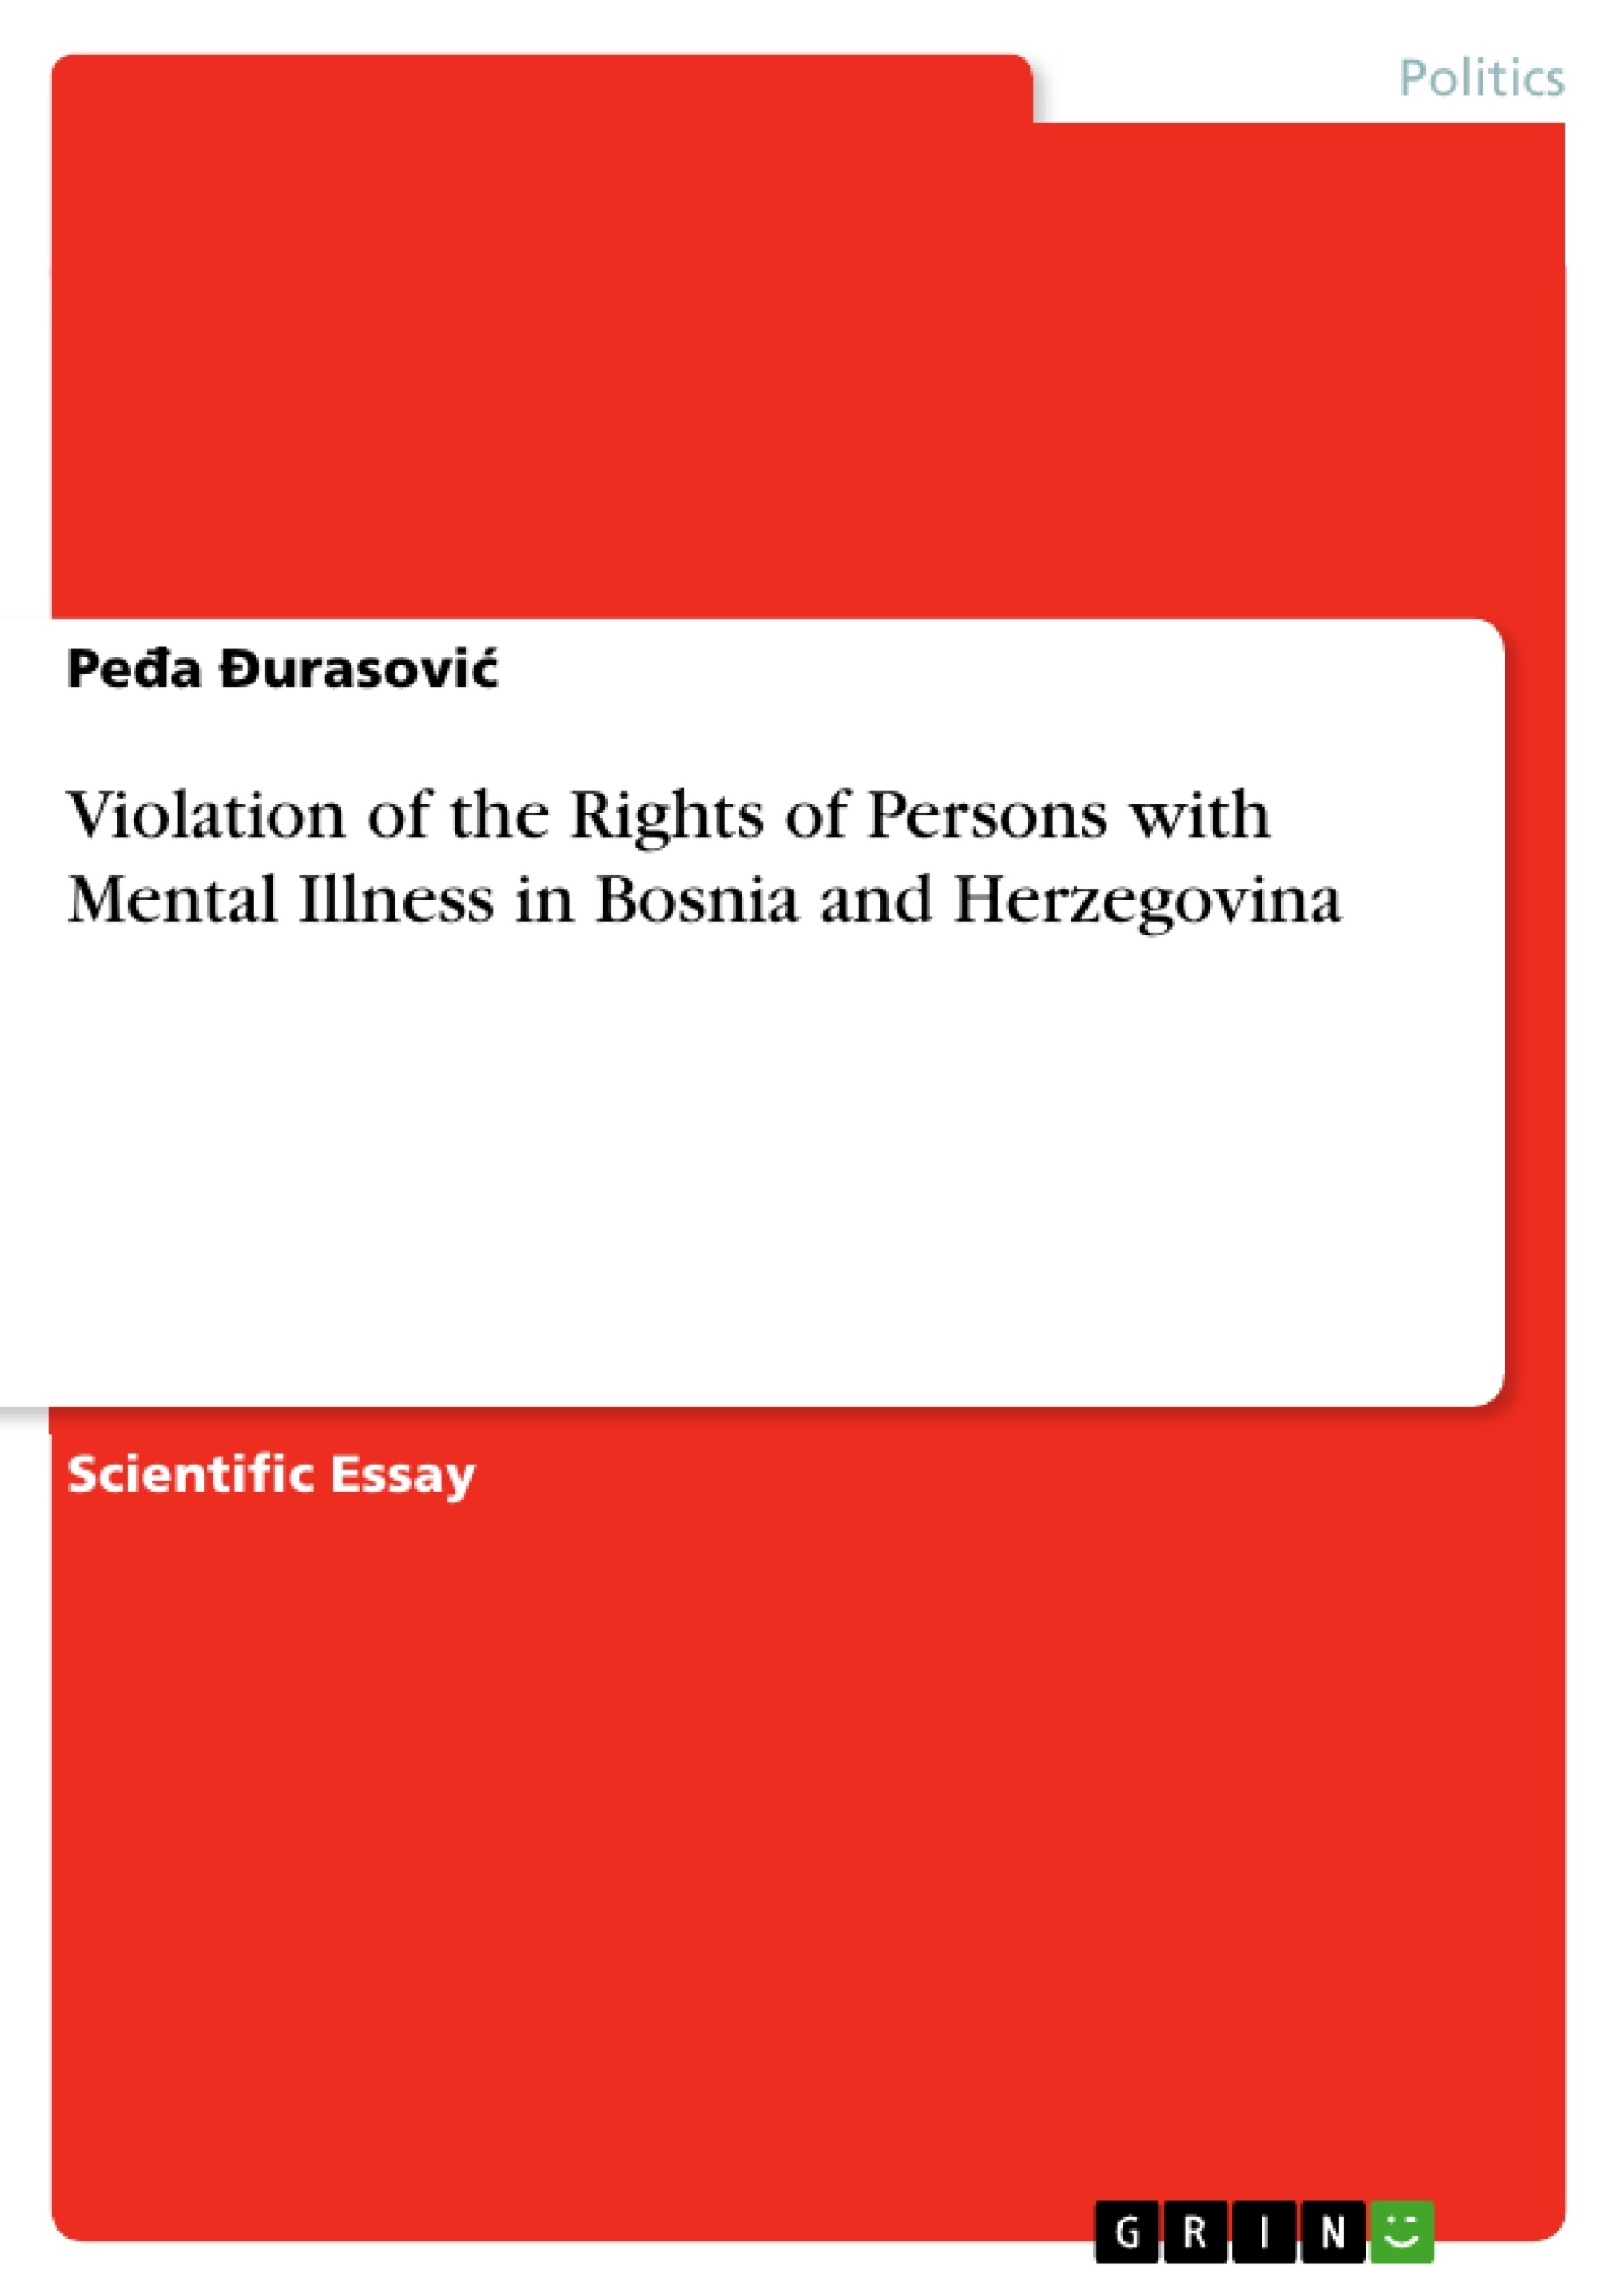 Title: Violation of the Rights of Persons with Mental Illness in Bosnia and Herzegovina